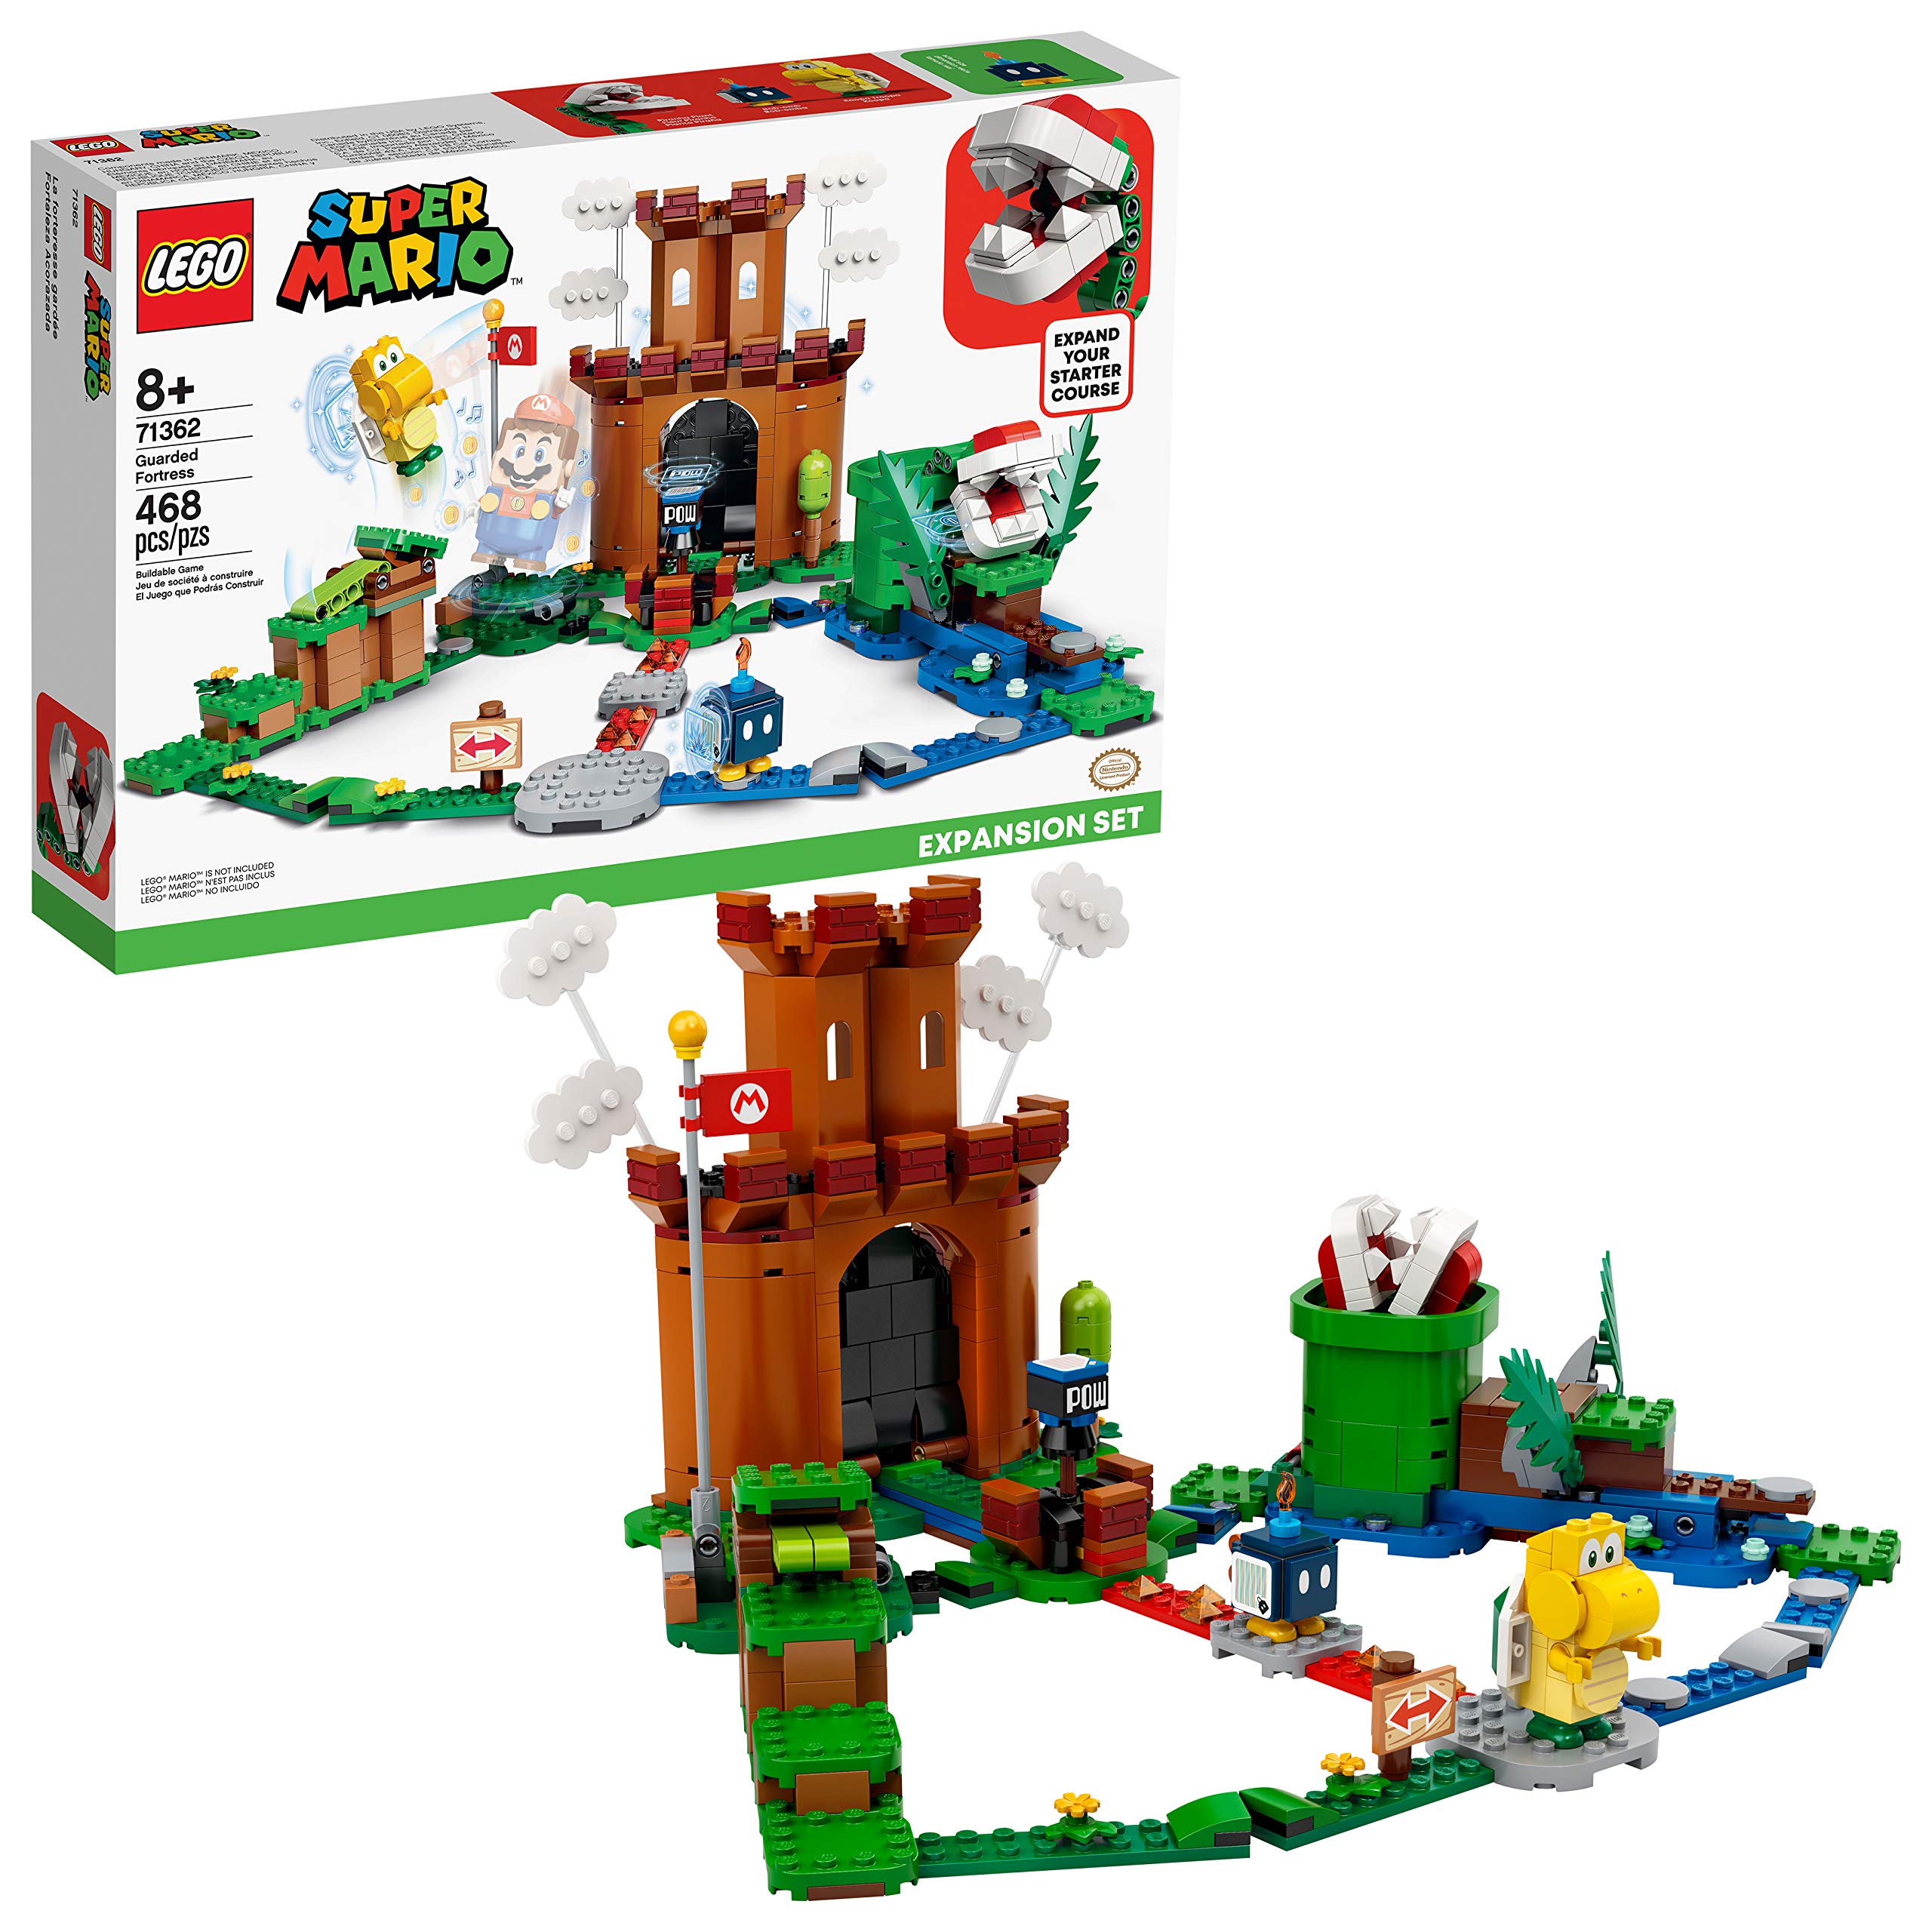 LEGO Super Mario Guarded Fortress Expansion Set 71362 Building Kit (7593217523950)